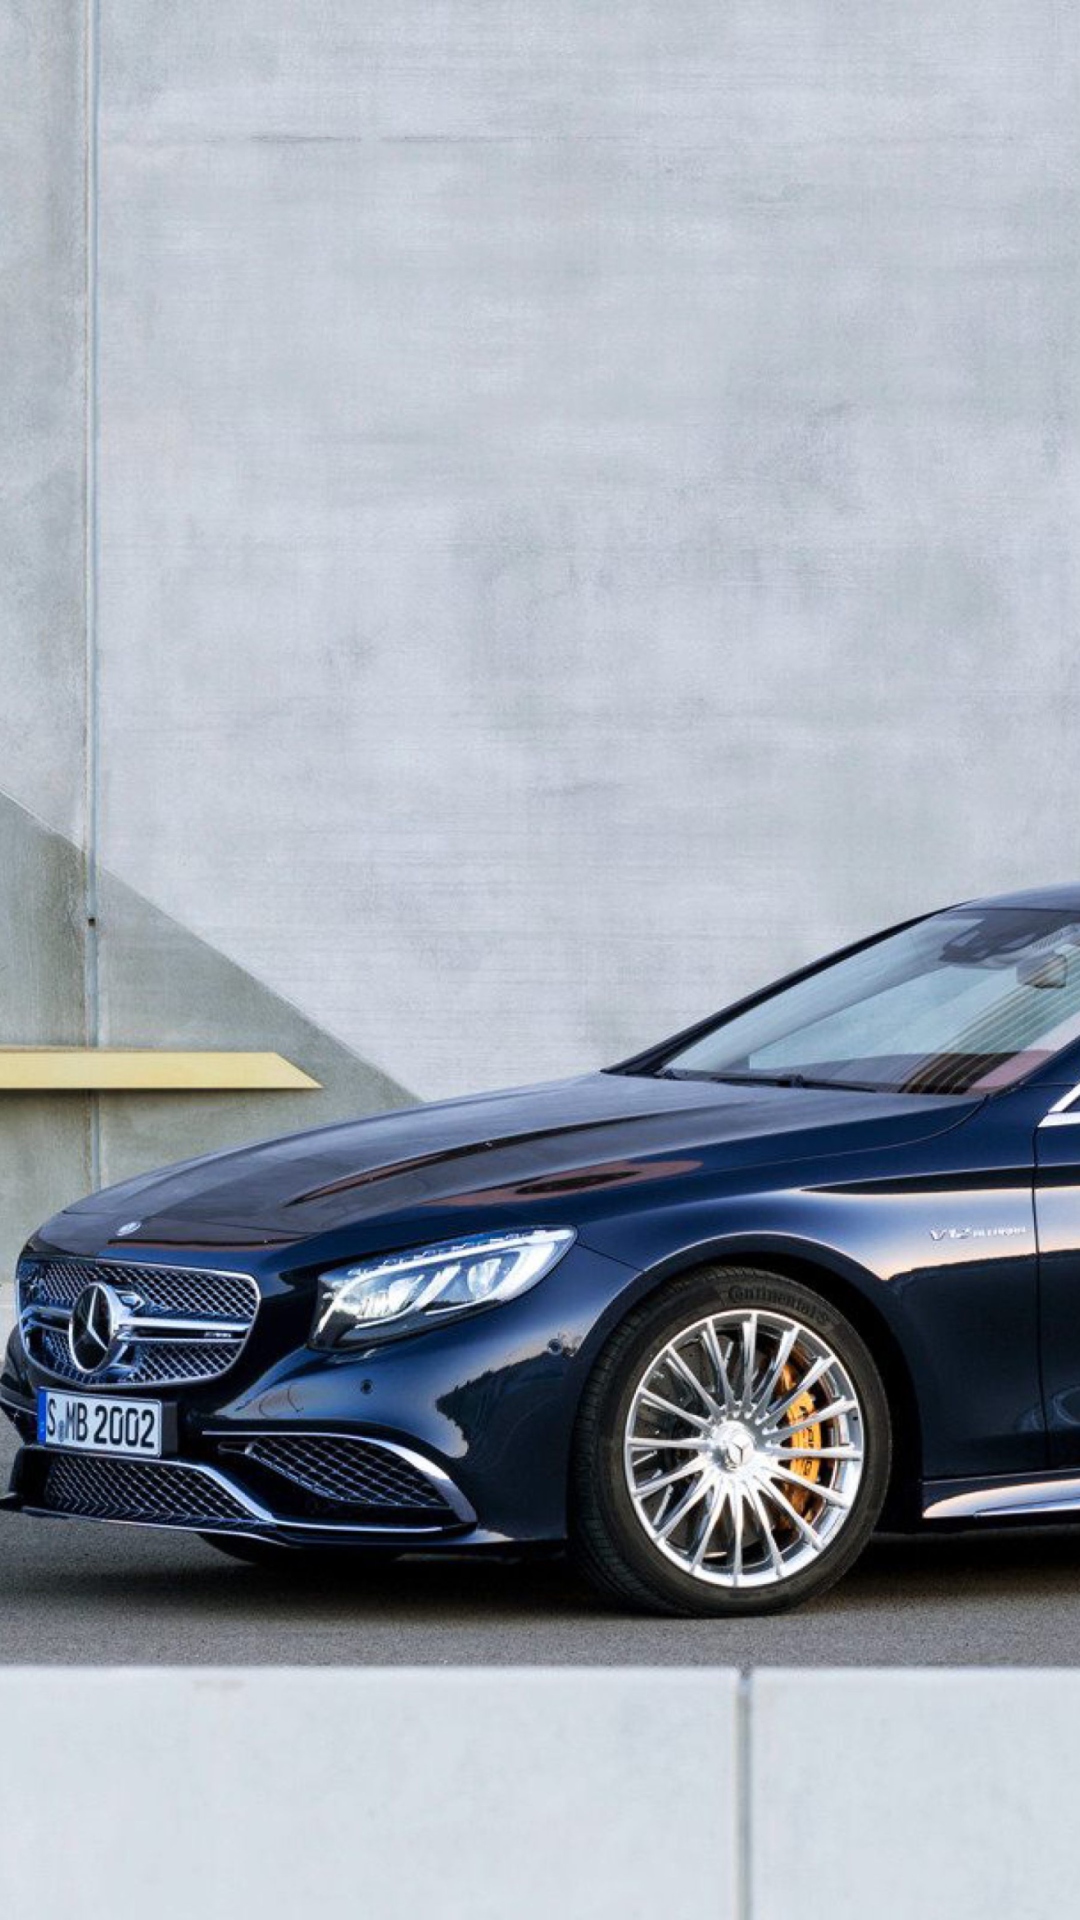 Mercedes-Benz S65 AMG Coupe wallpaper 1080x1920